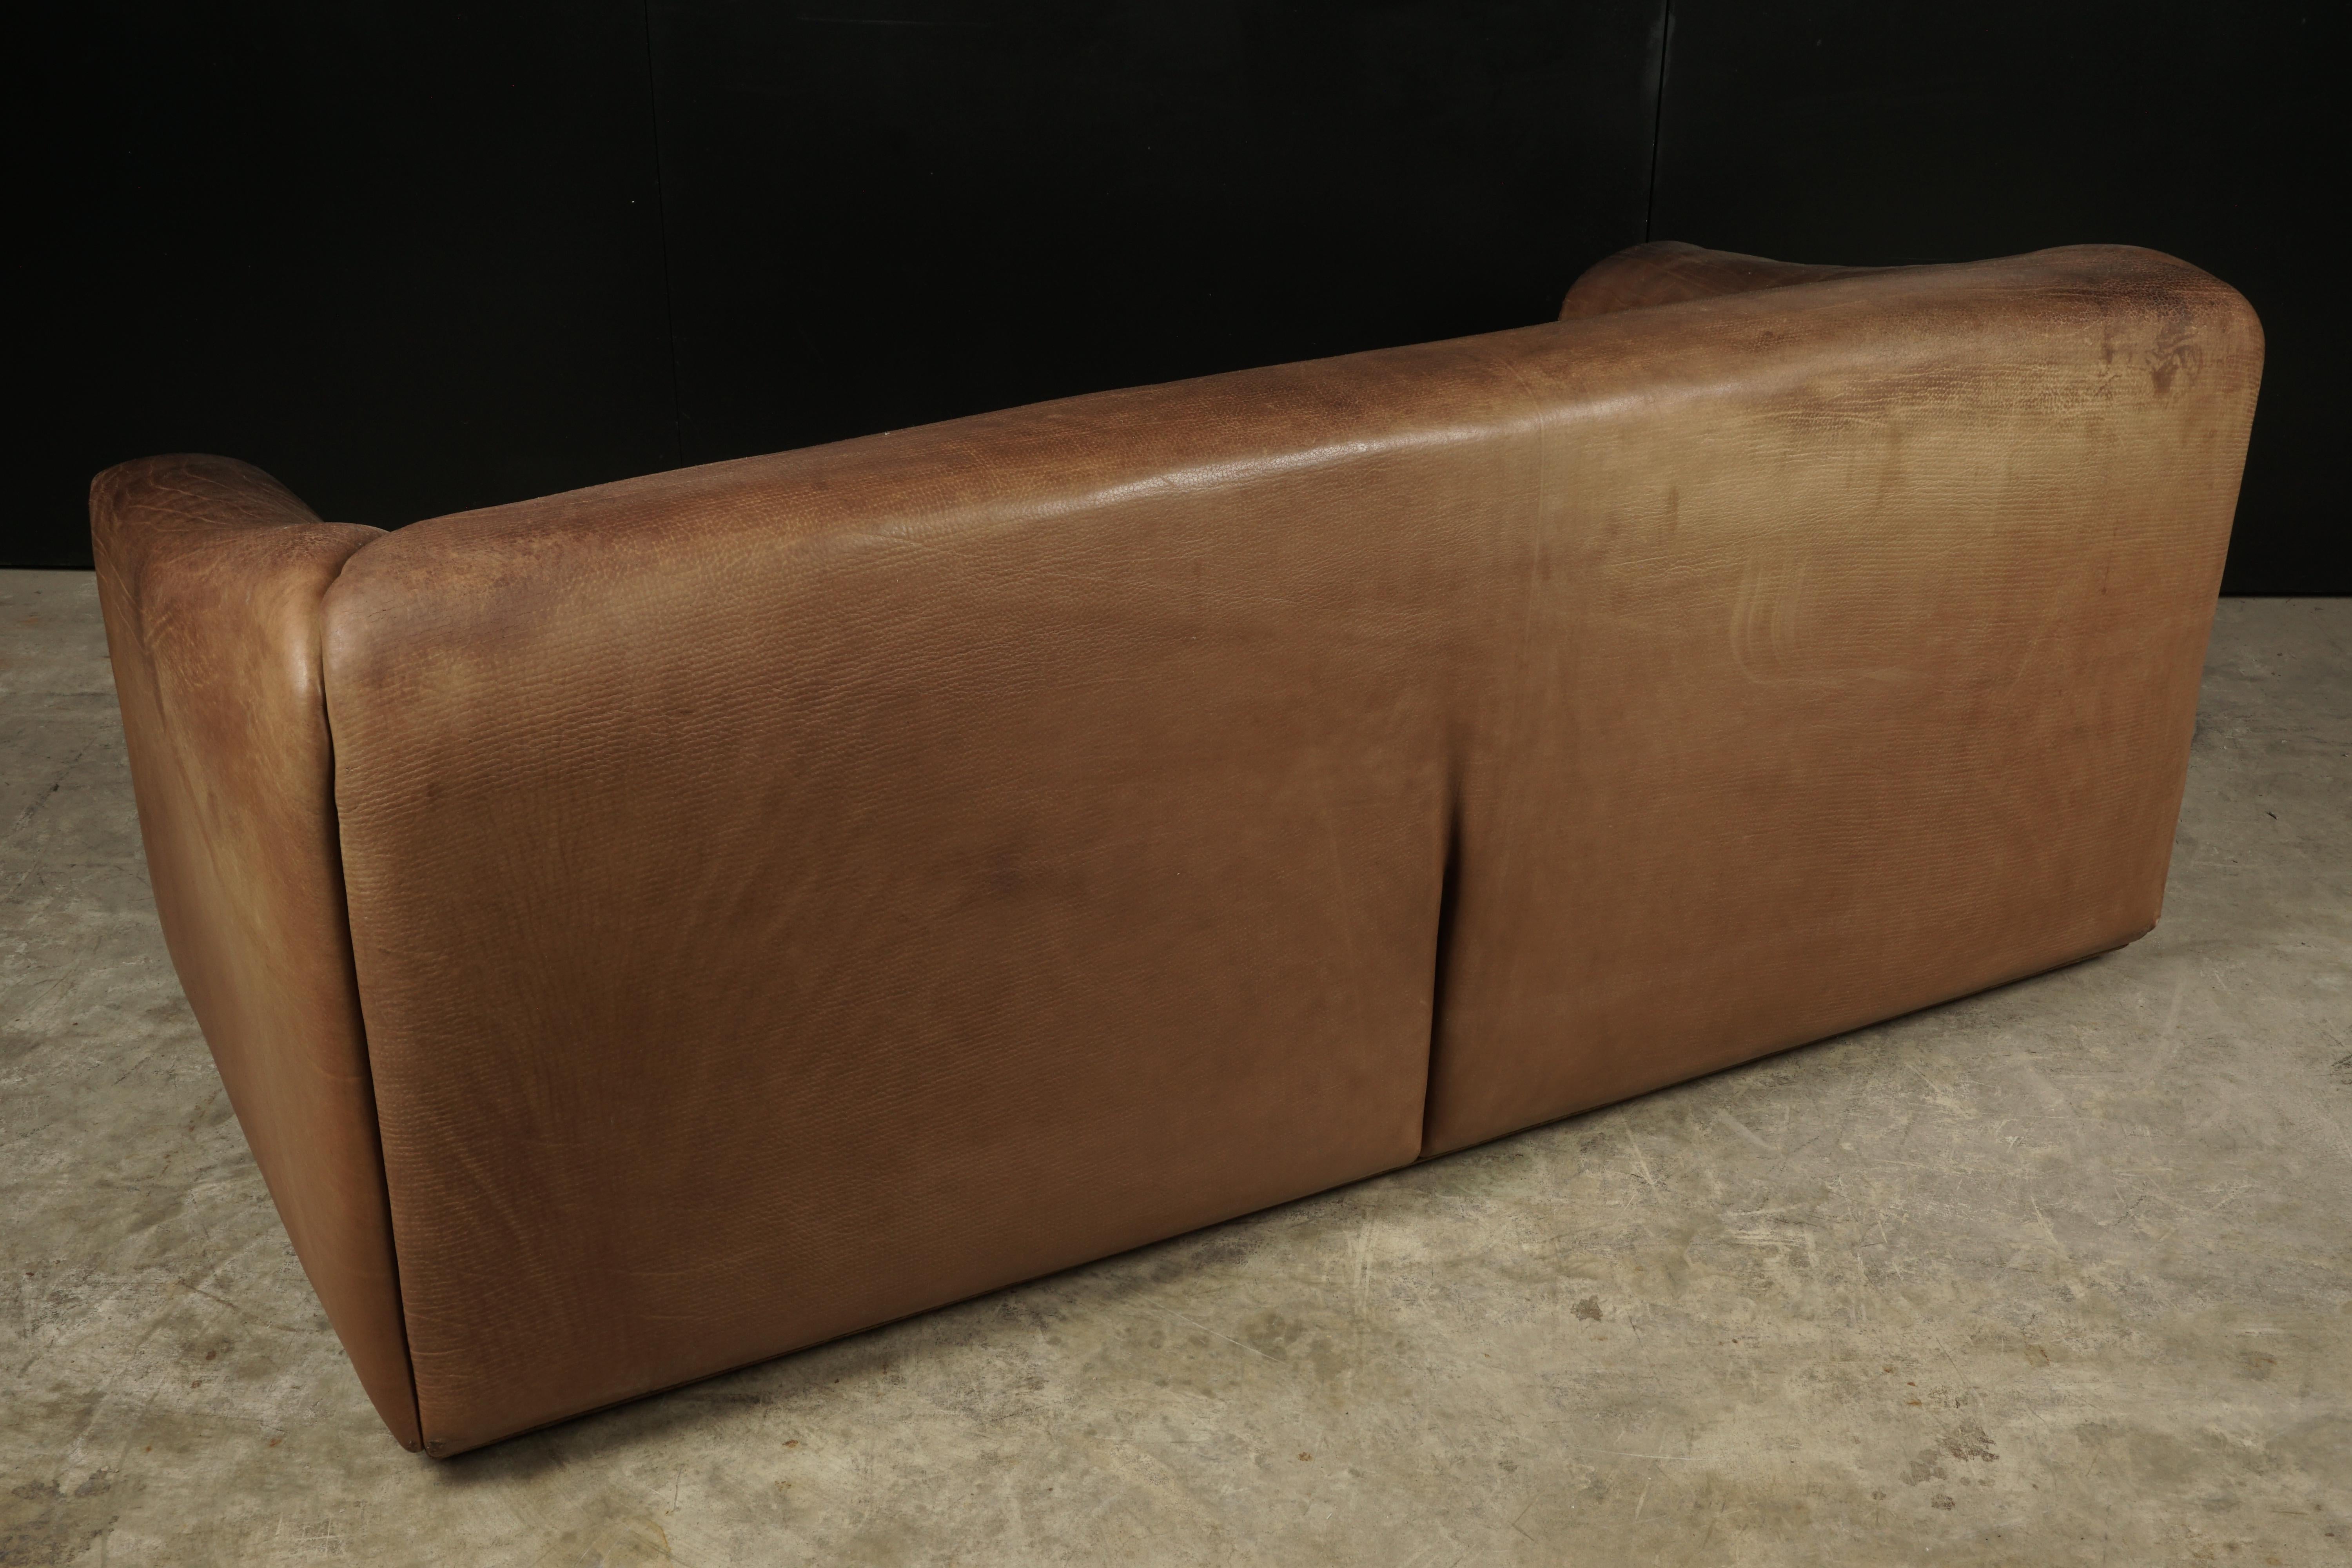 Three-Seat Leather Sofa Manufactured by De Sede, Switzerland, Model DS 47 1